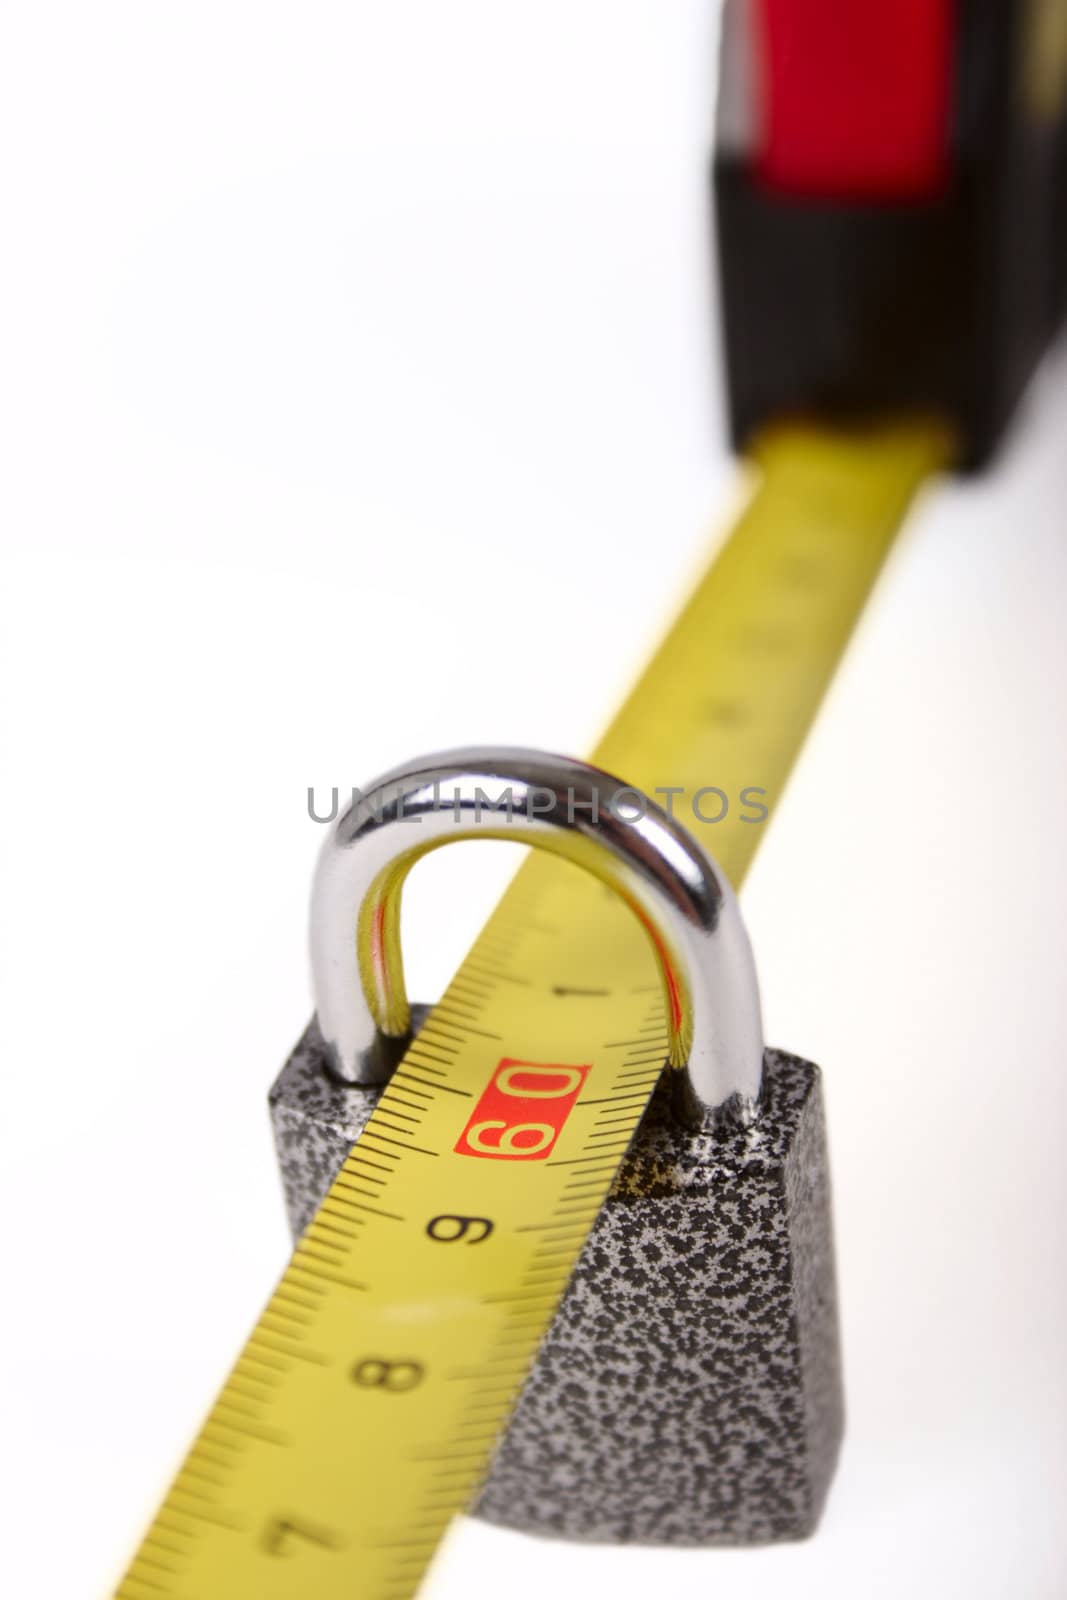 Yellow measuring tape passed through the closed lock removed close up